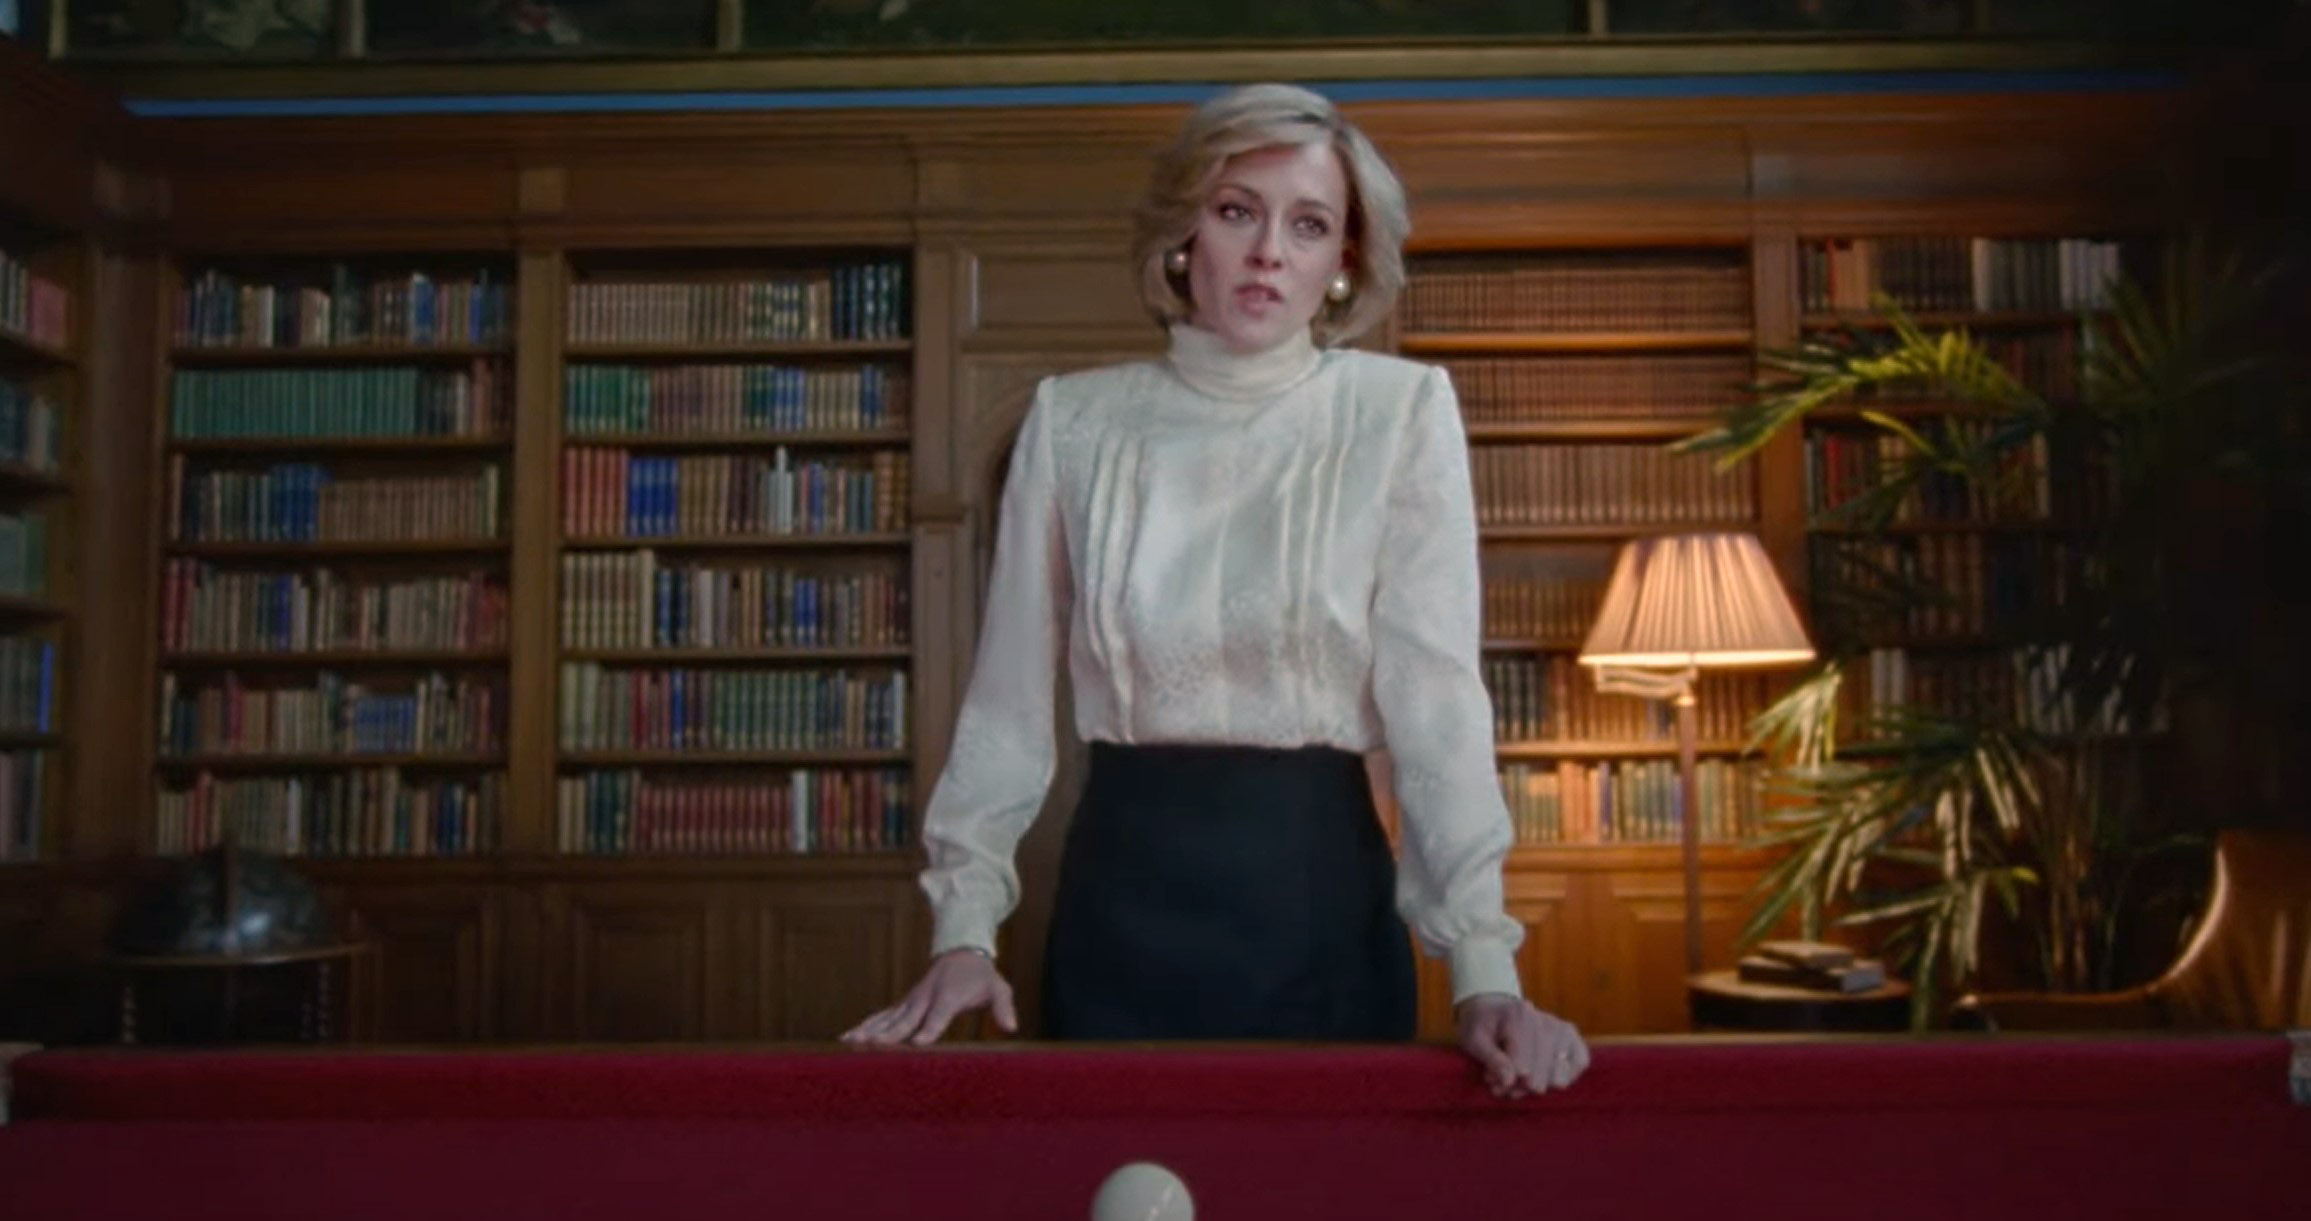 PHOTO: Kristen Stewart appears as Princess Diana in a trailer for the film, "Spencer."